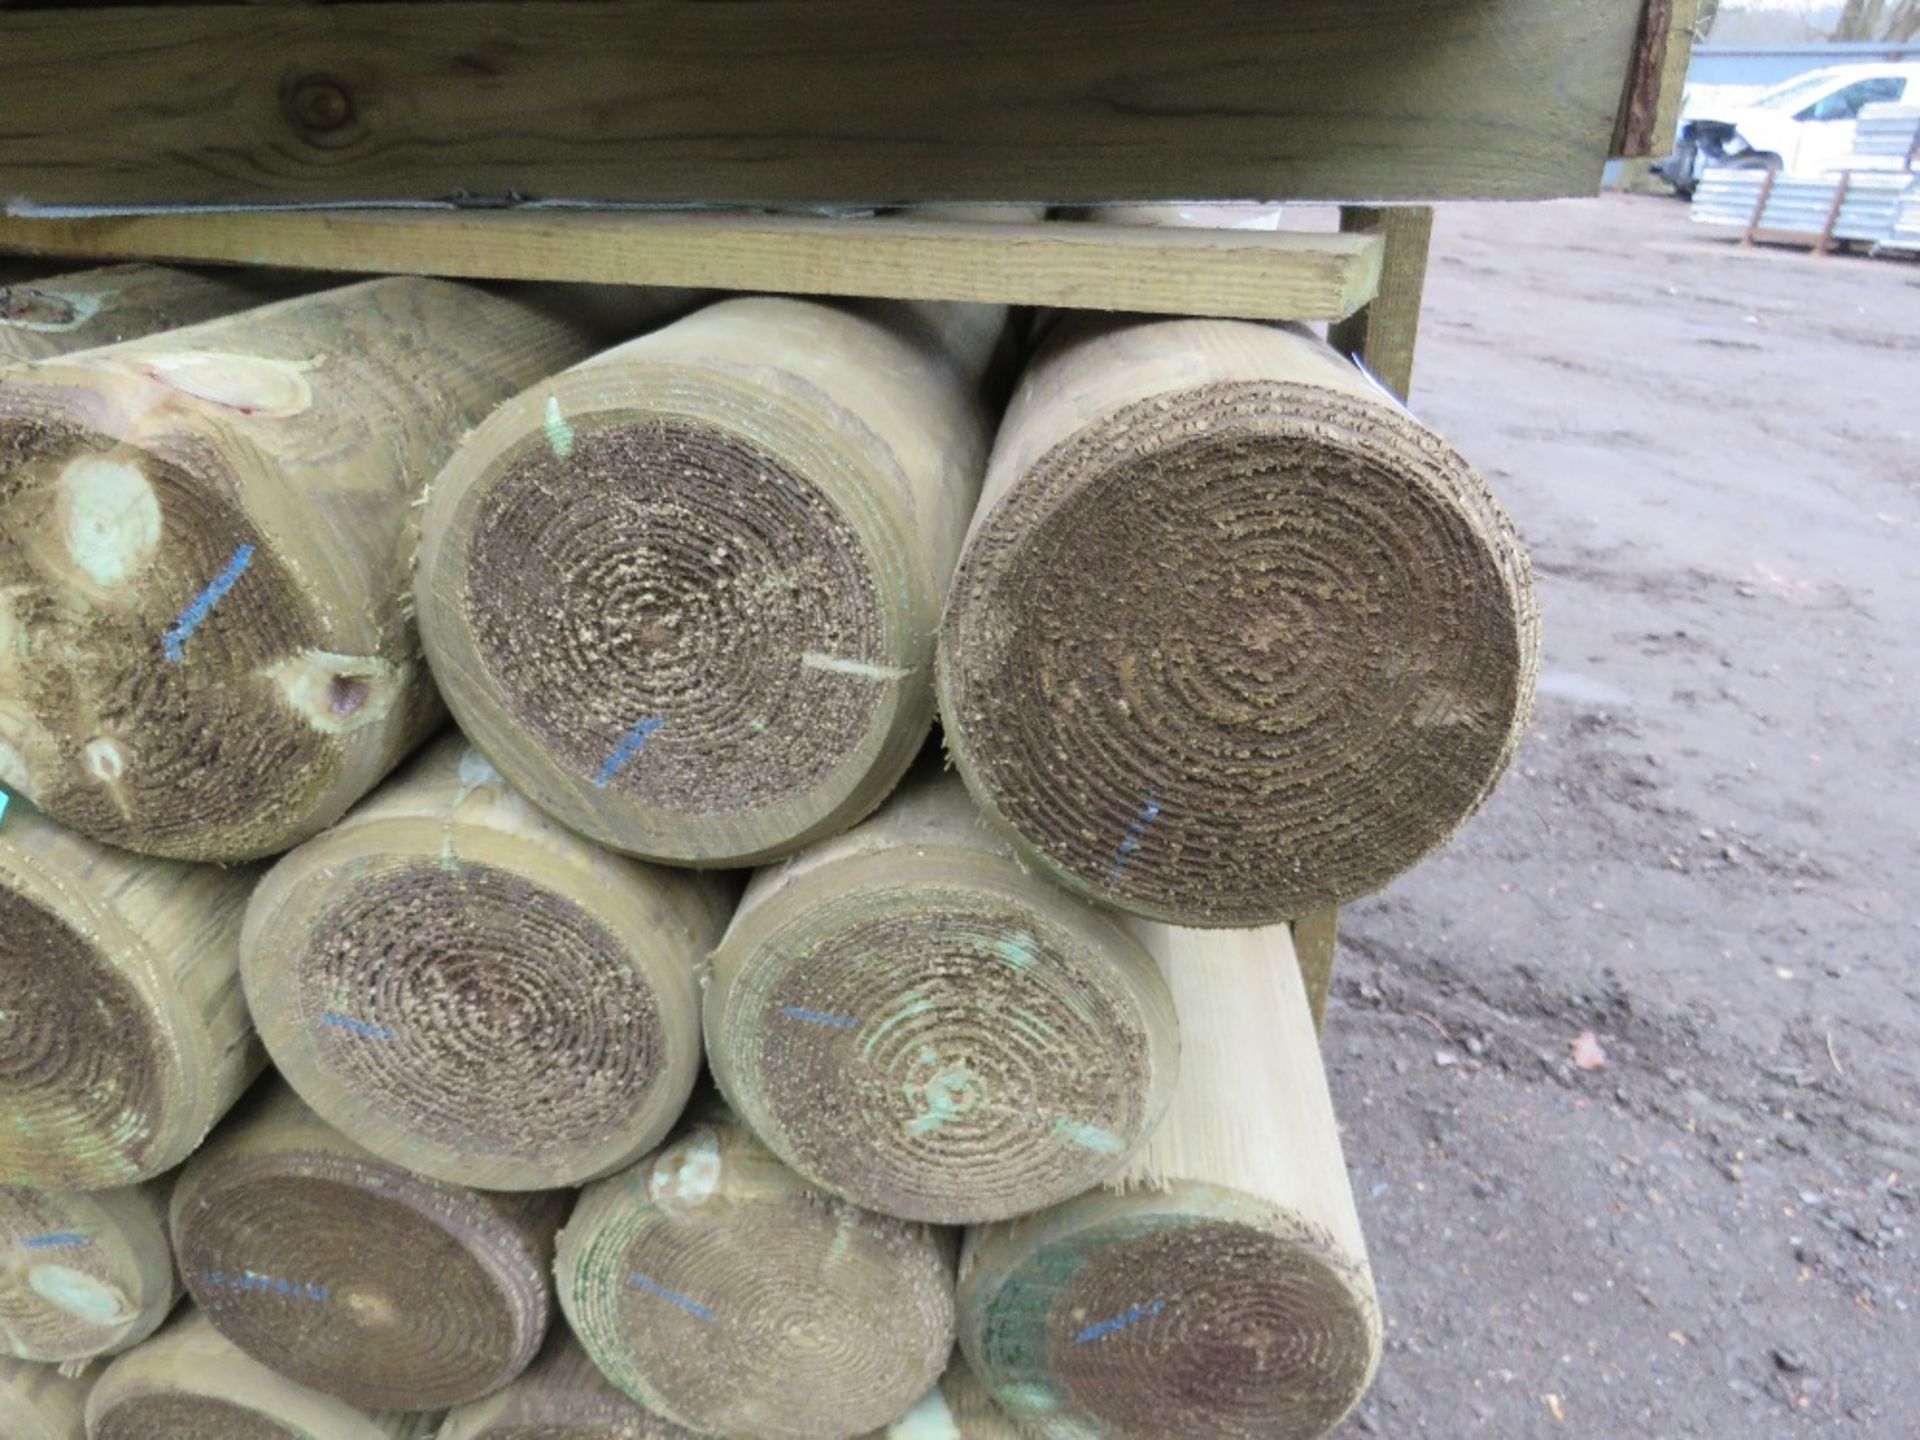 PACK OF 28NO HEAVY DUTY PRESSURE TREATED TIMBER FENCE POSTS, 2.4M LENGTH 150MM DIAMETER WITH A POIN - Image 3 of 3